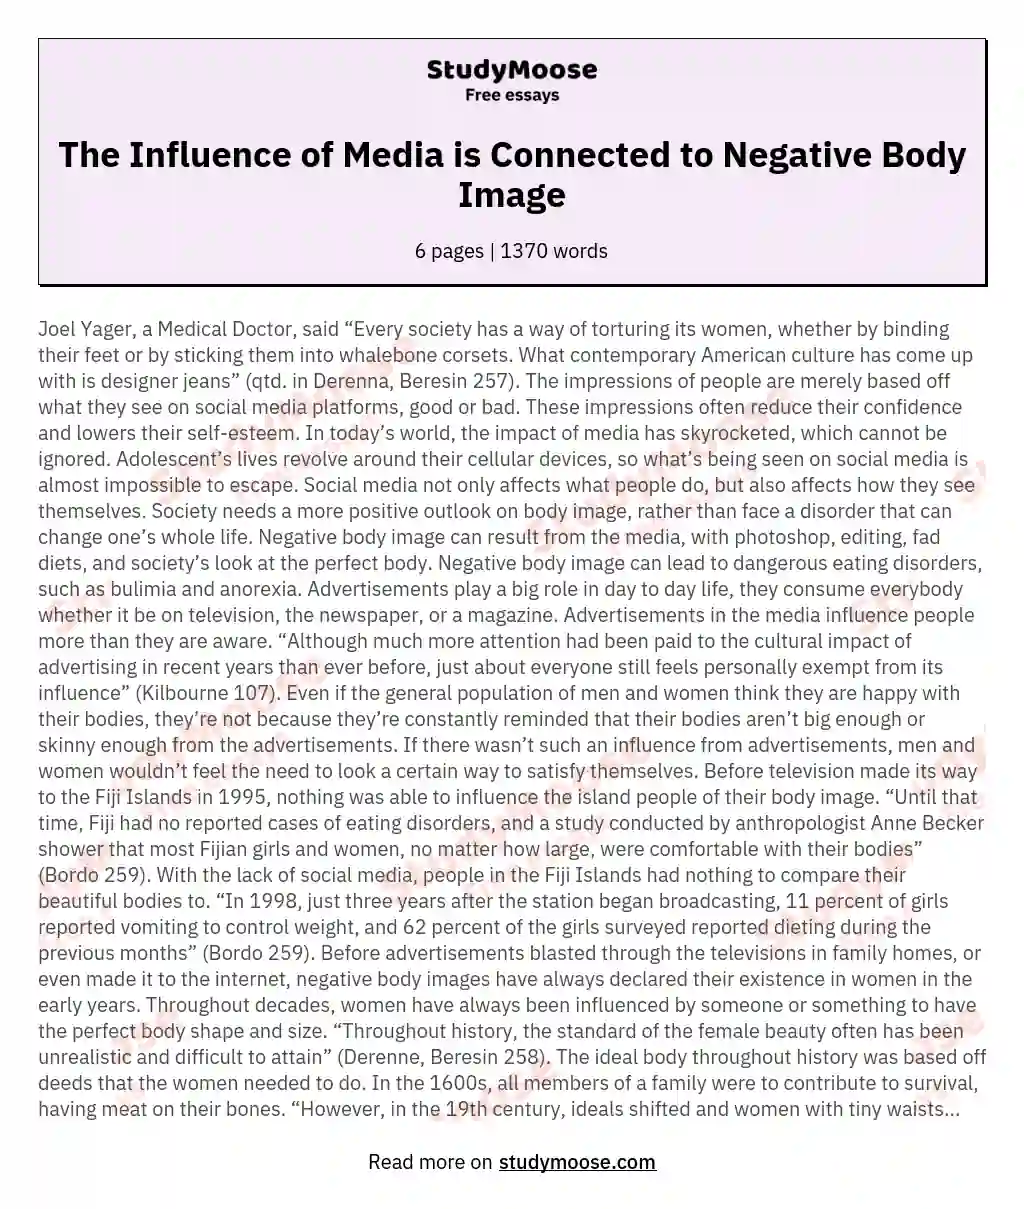 The Influence of Media is Connected to Negative Body Image essay